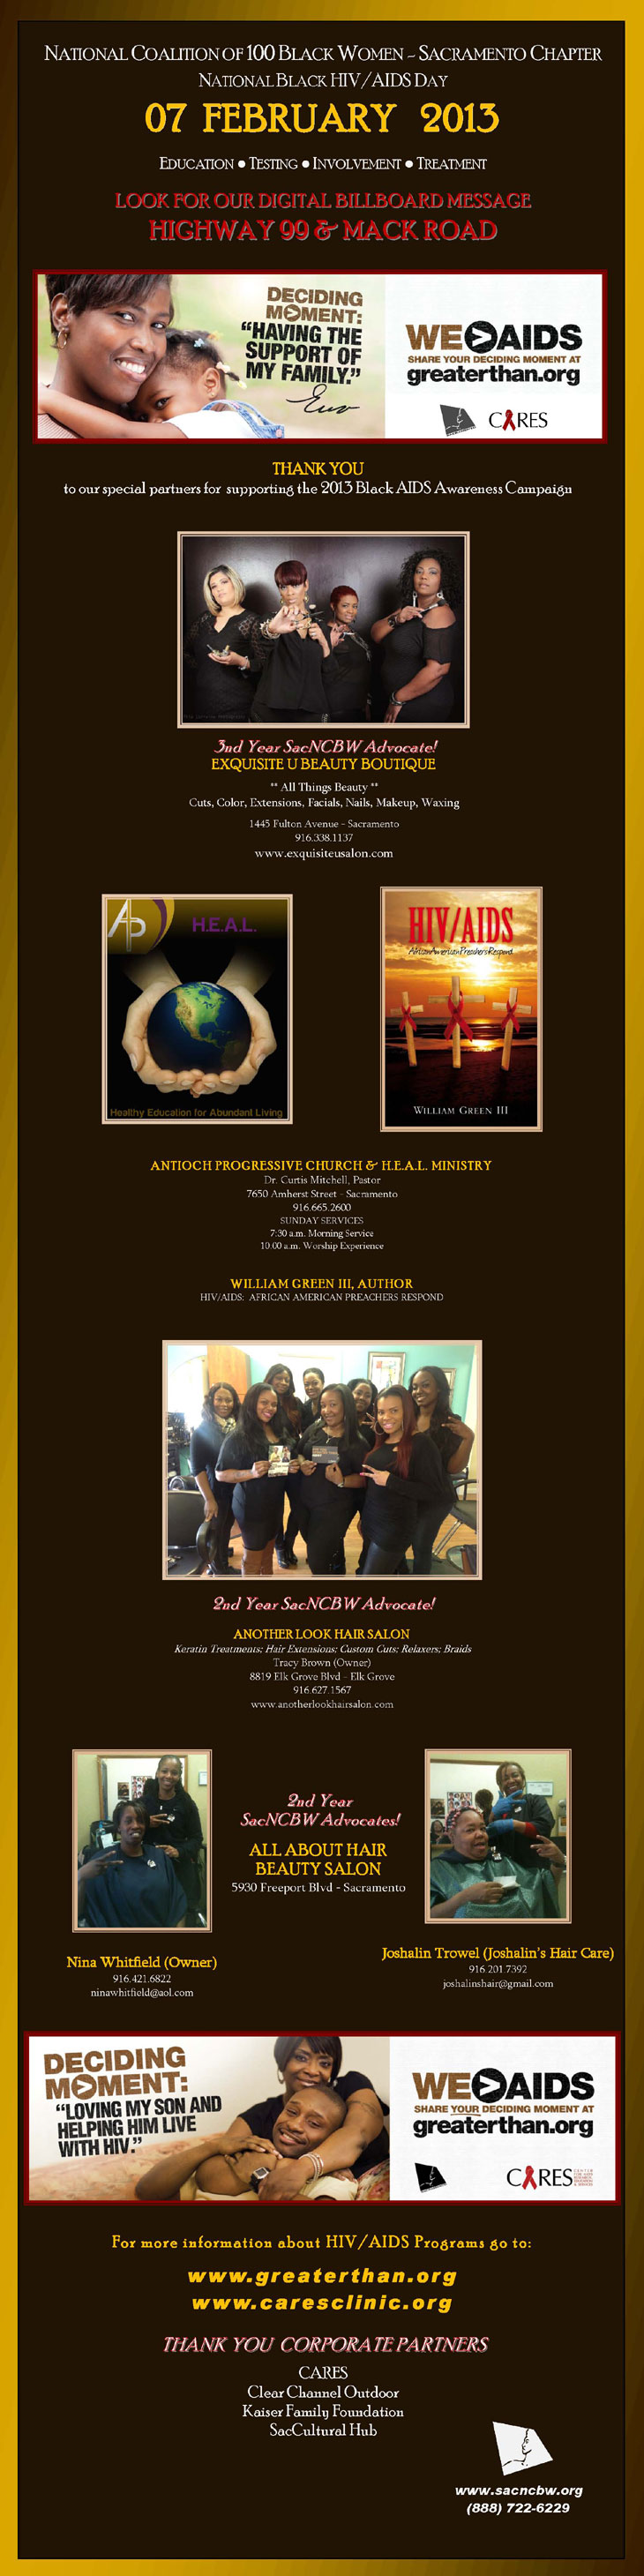 Sacramento Chapter of the National Coalition of 100 Black Women, Inc presents an exclusive eblast message of thanks to its special partners for supporting the 2013 Black AIDS Awareness Campaign